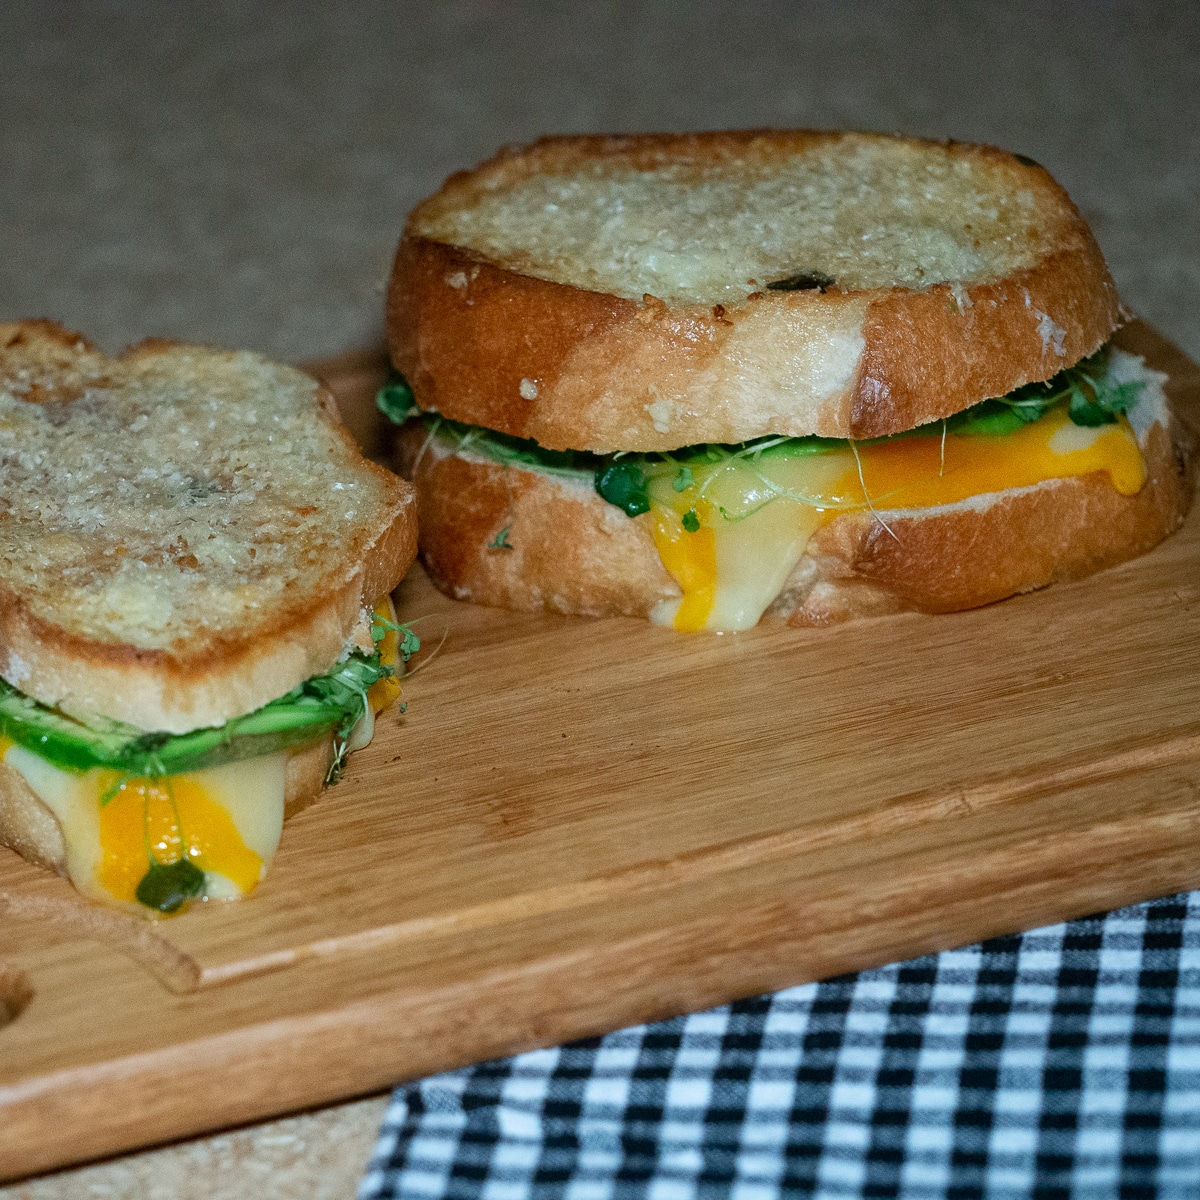 Grilled cheese sandwich filled with oozing cheese and avocado placed on top of wooden boardand